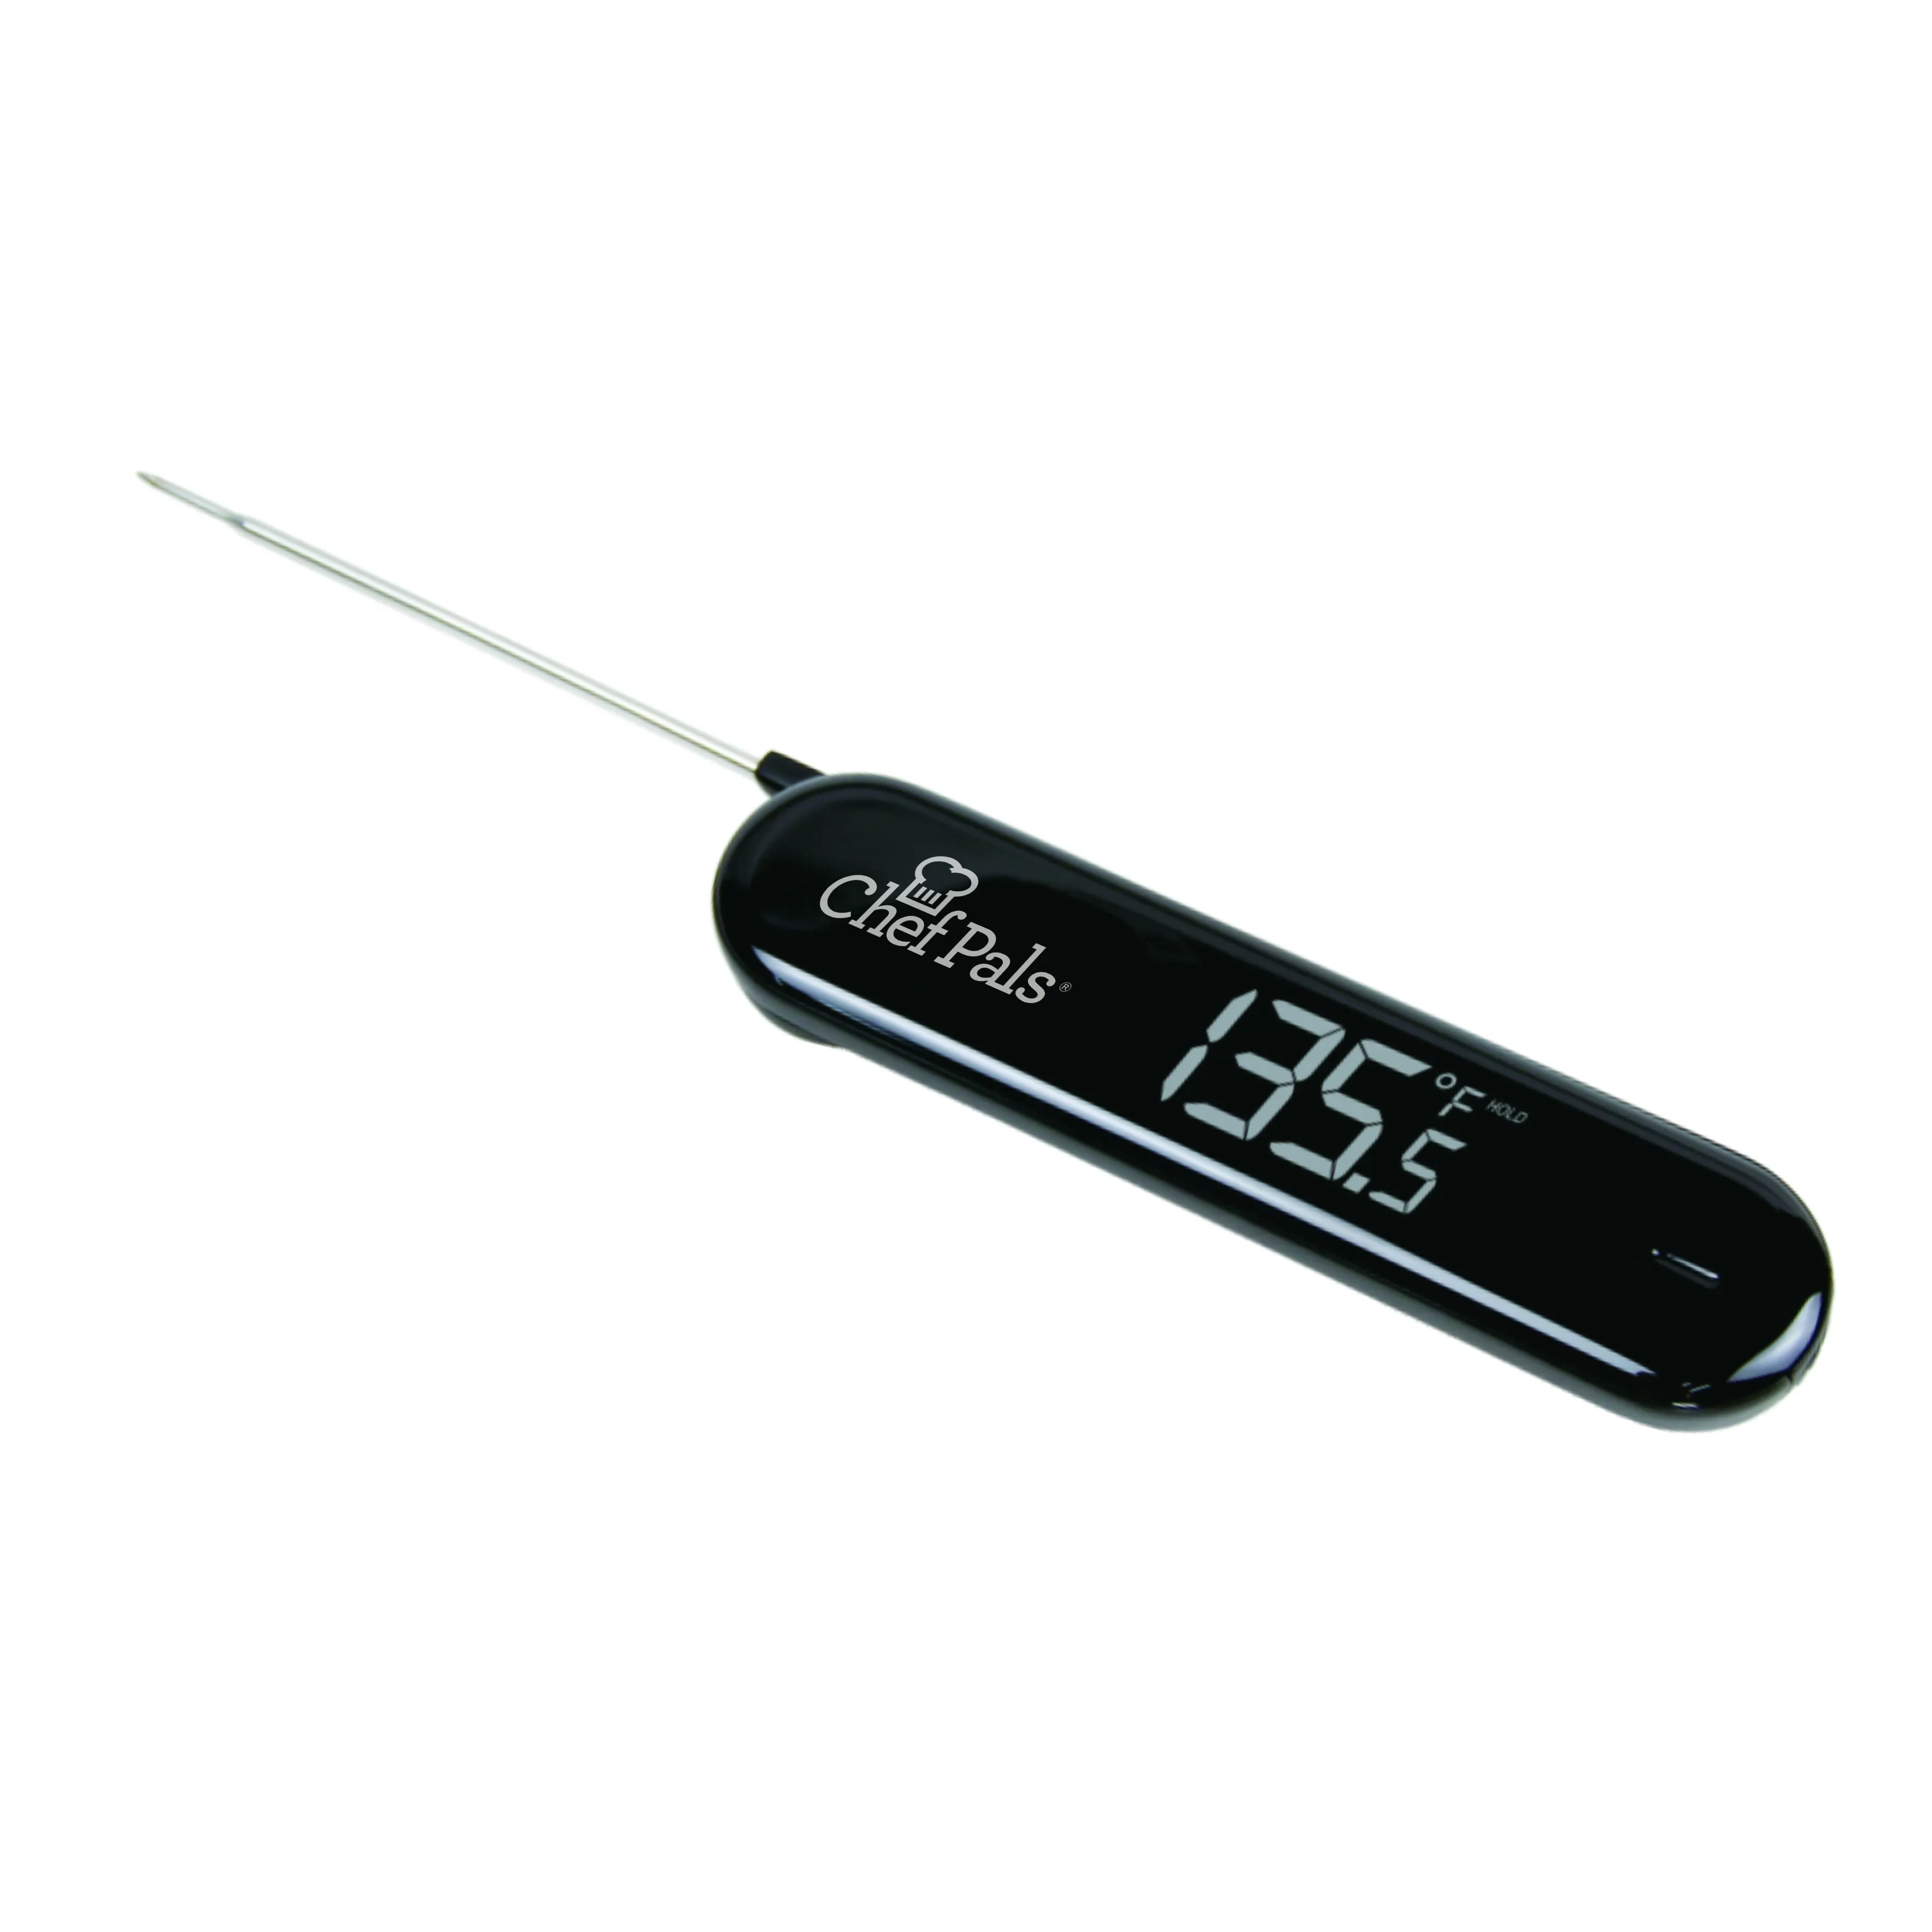 Digital BBQ Barbecue Instant Read BBQ Meat Thermometer Soup Beverage Food Thermometer With Folding Probe